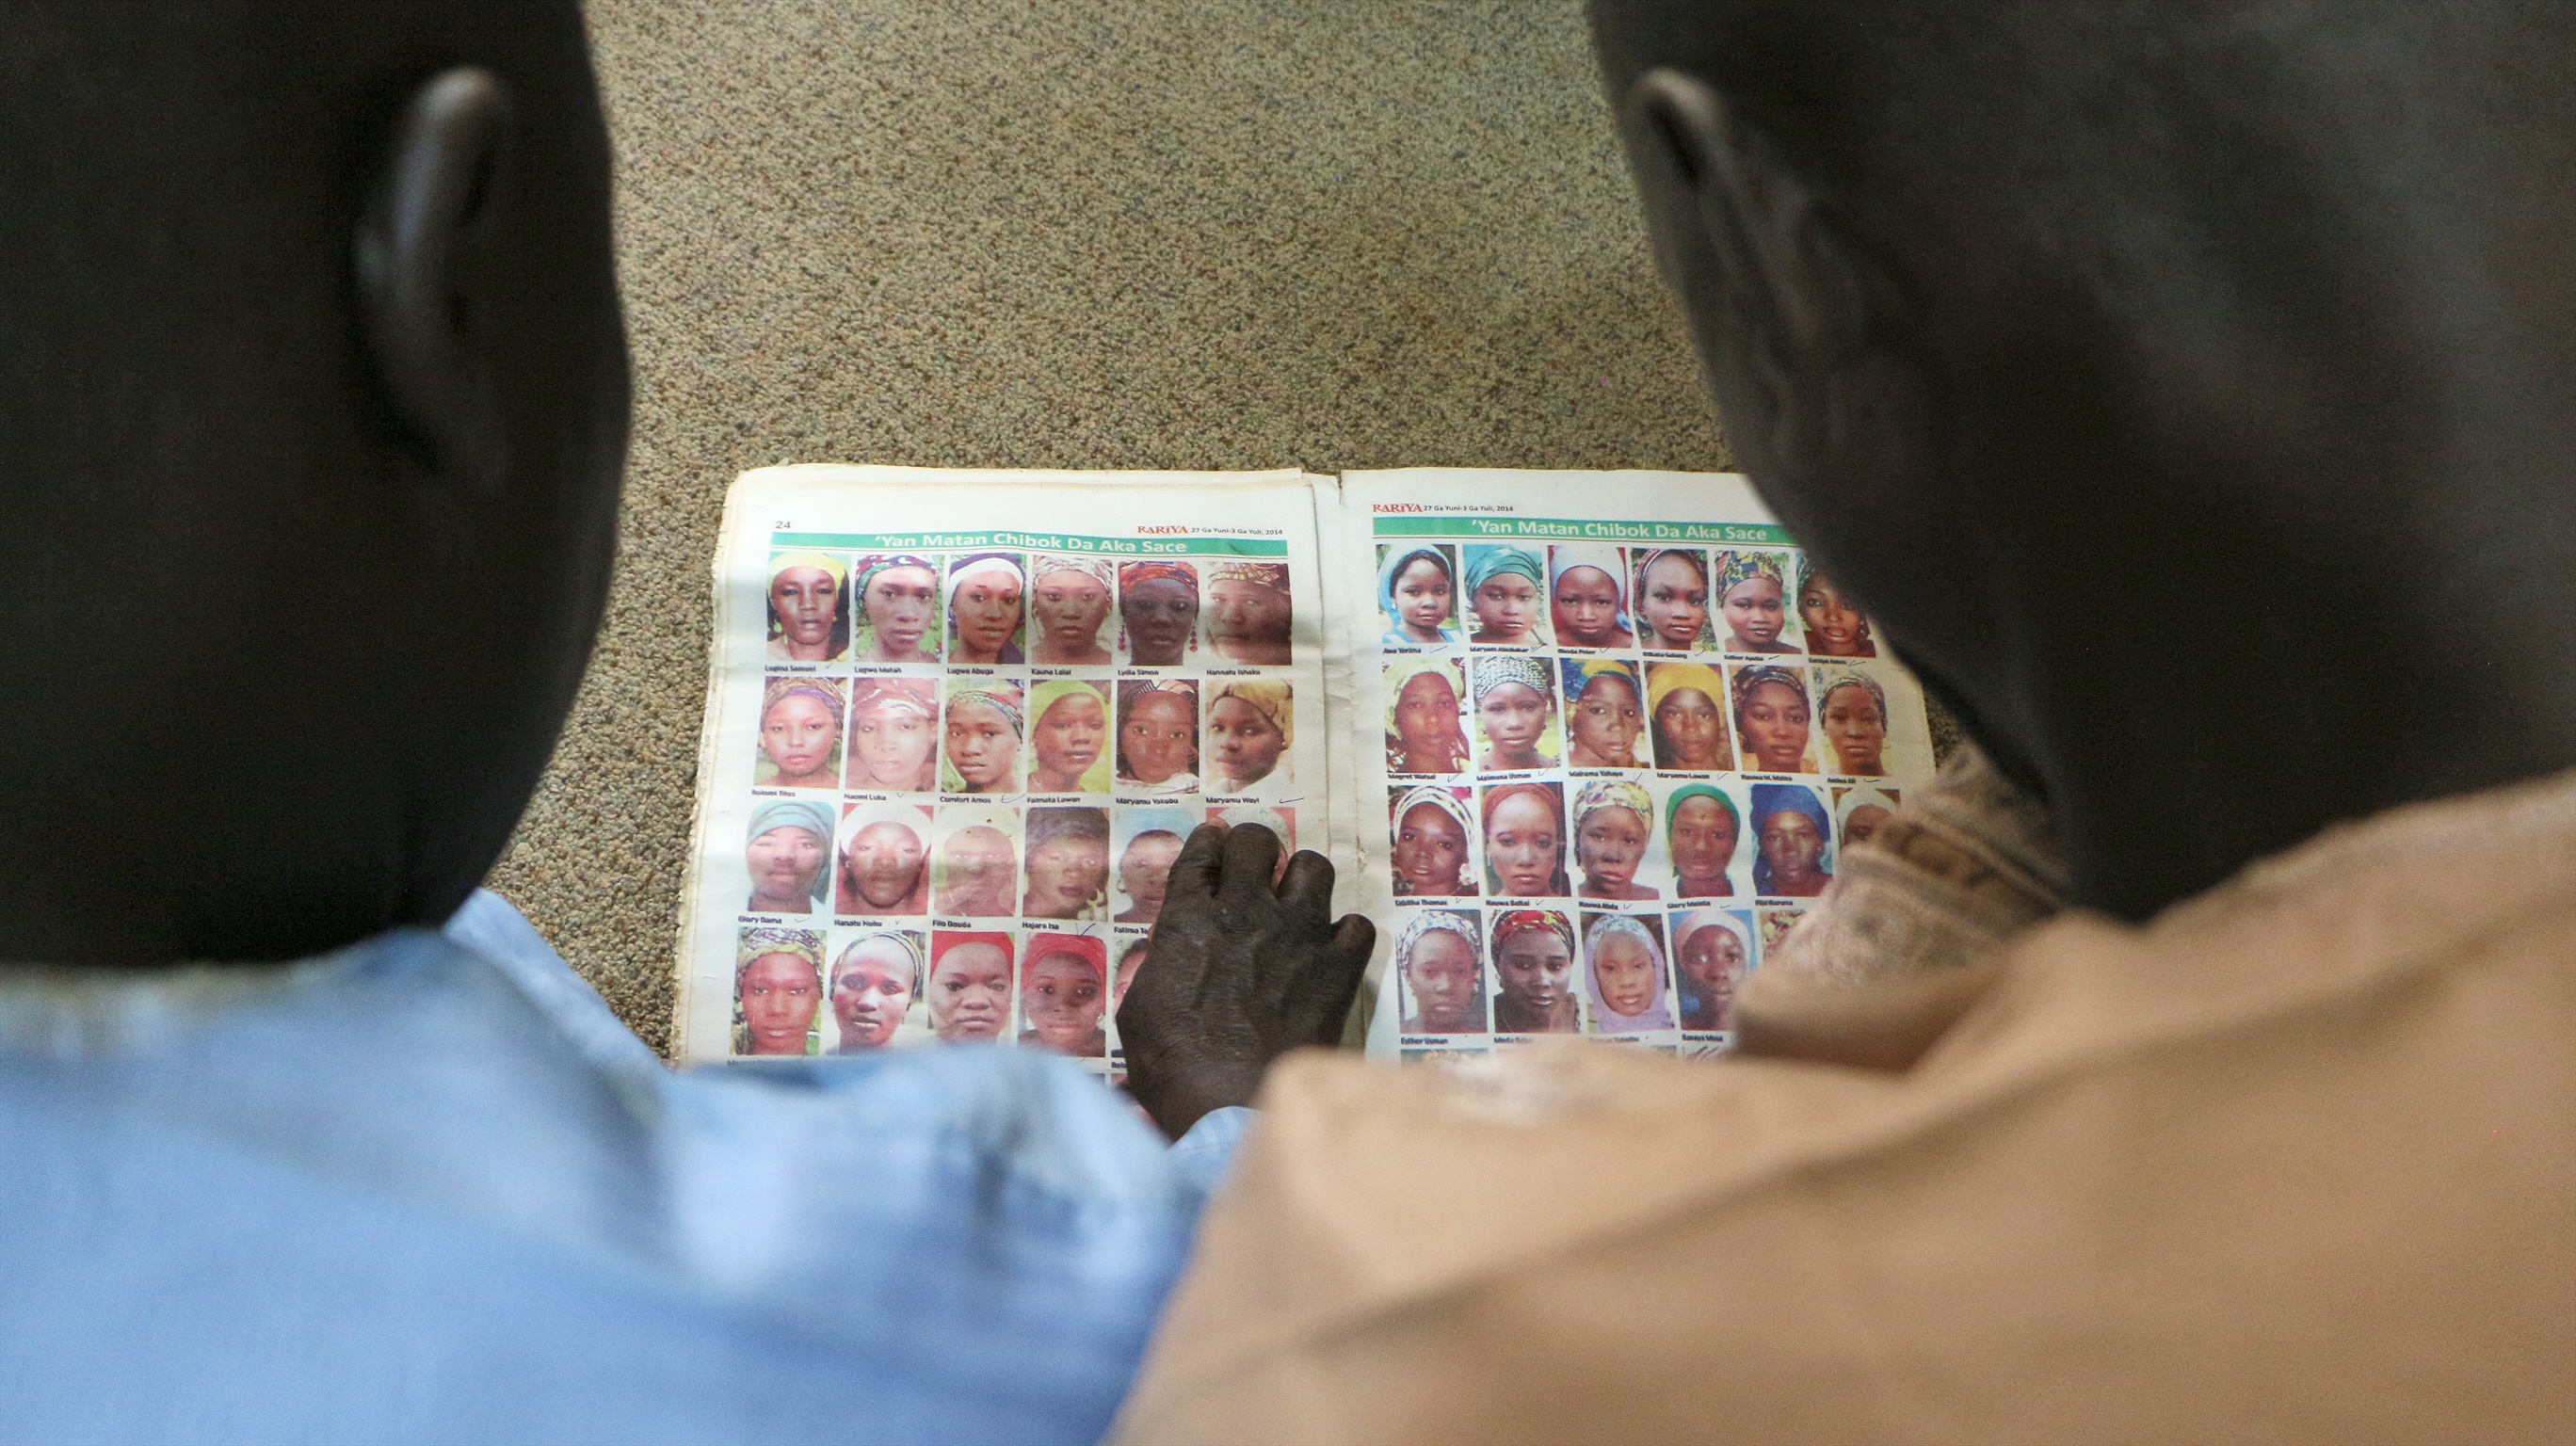 At Least One Abducted Chibok Girl Free from Boko Haram Captivity in Nigeria After 7 Years